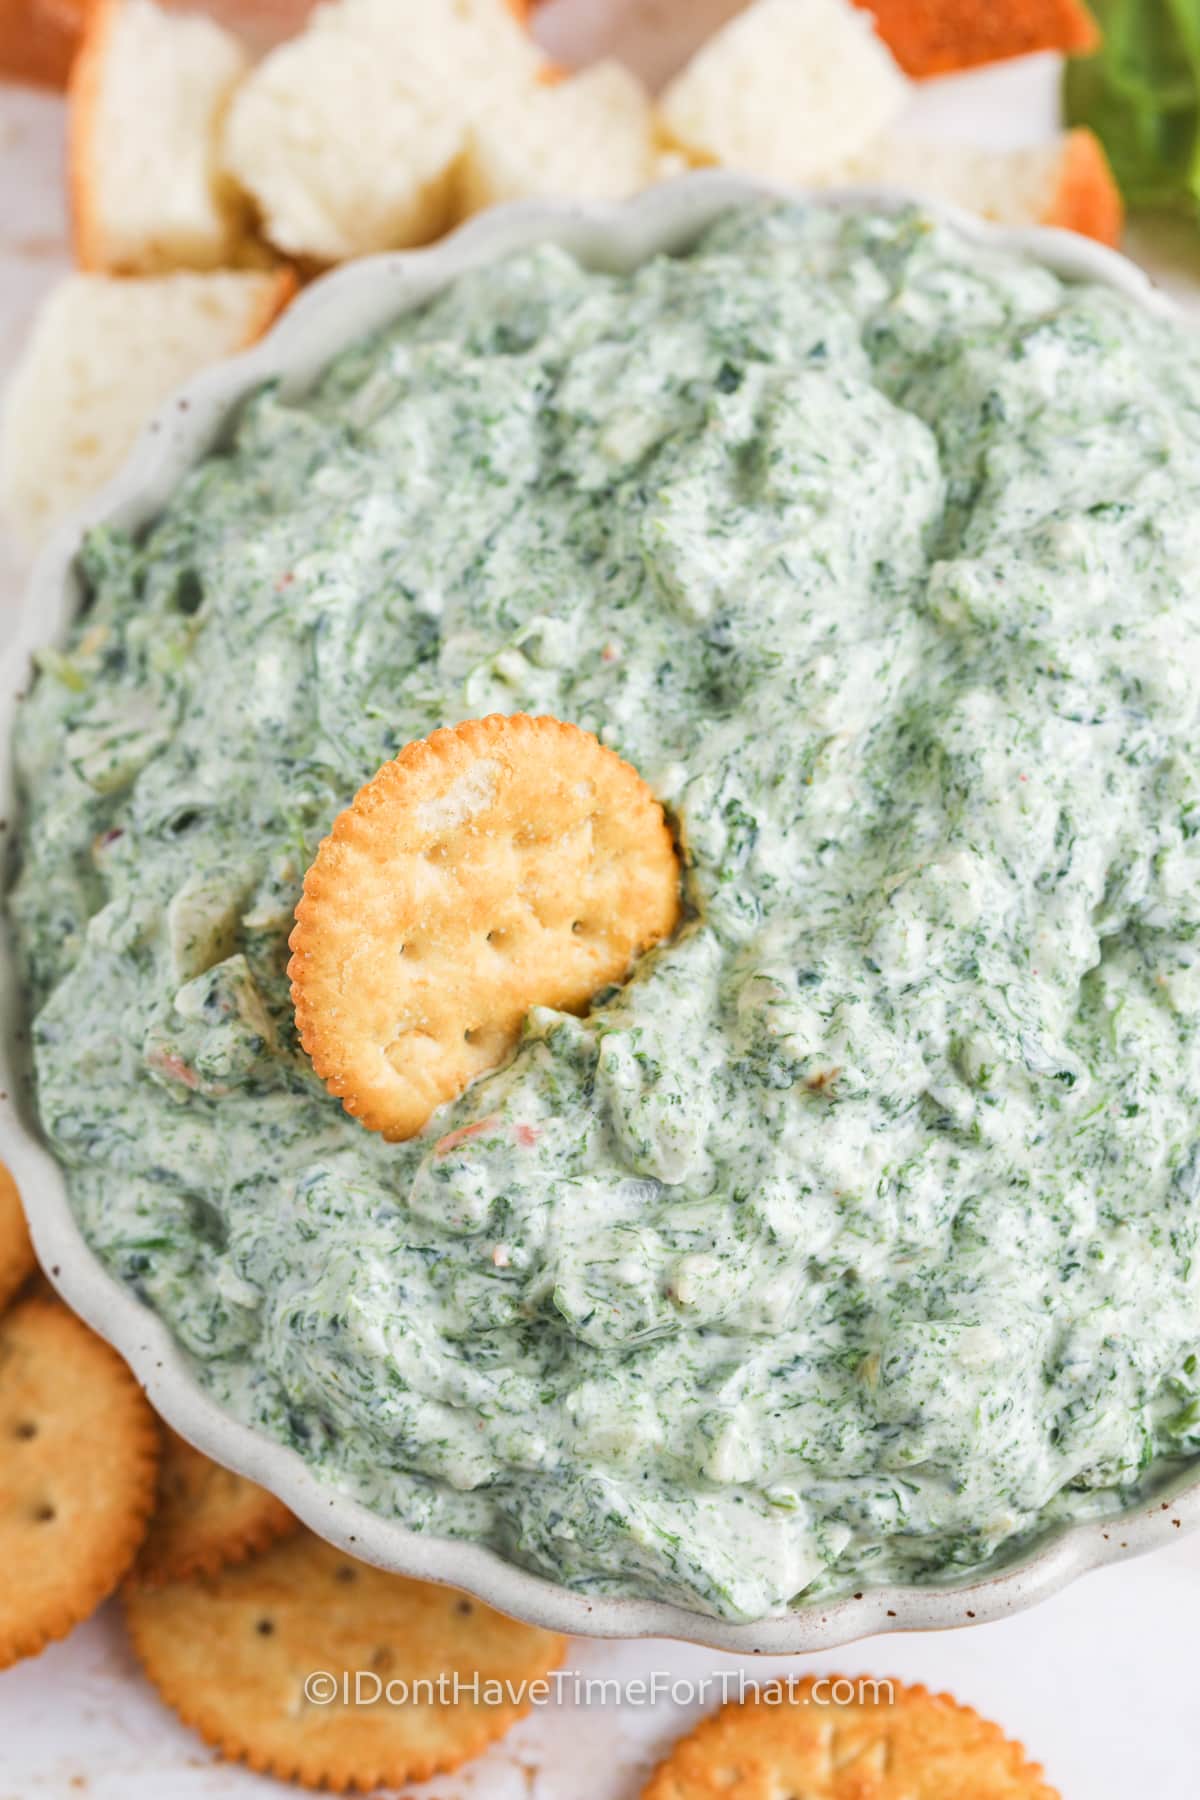 Spinach Dip with a cracker dipped in